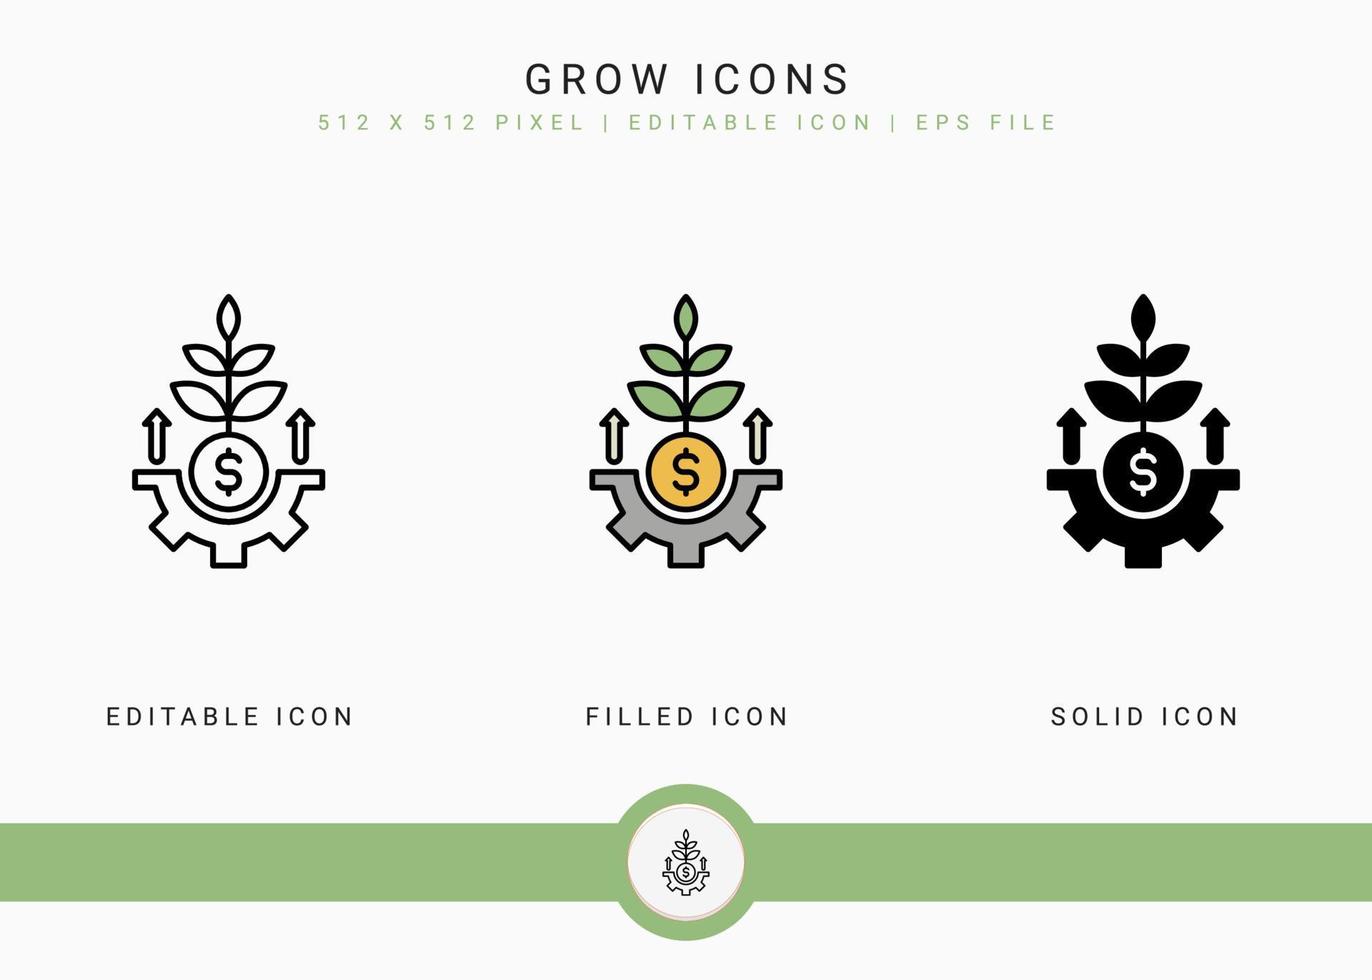 Grow icons set vector illustration with solid icon line style. Business development concept. Editable stroke icon on isolated white background for web design, user interface, and mobile application